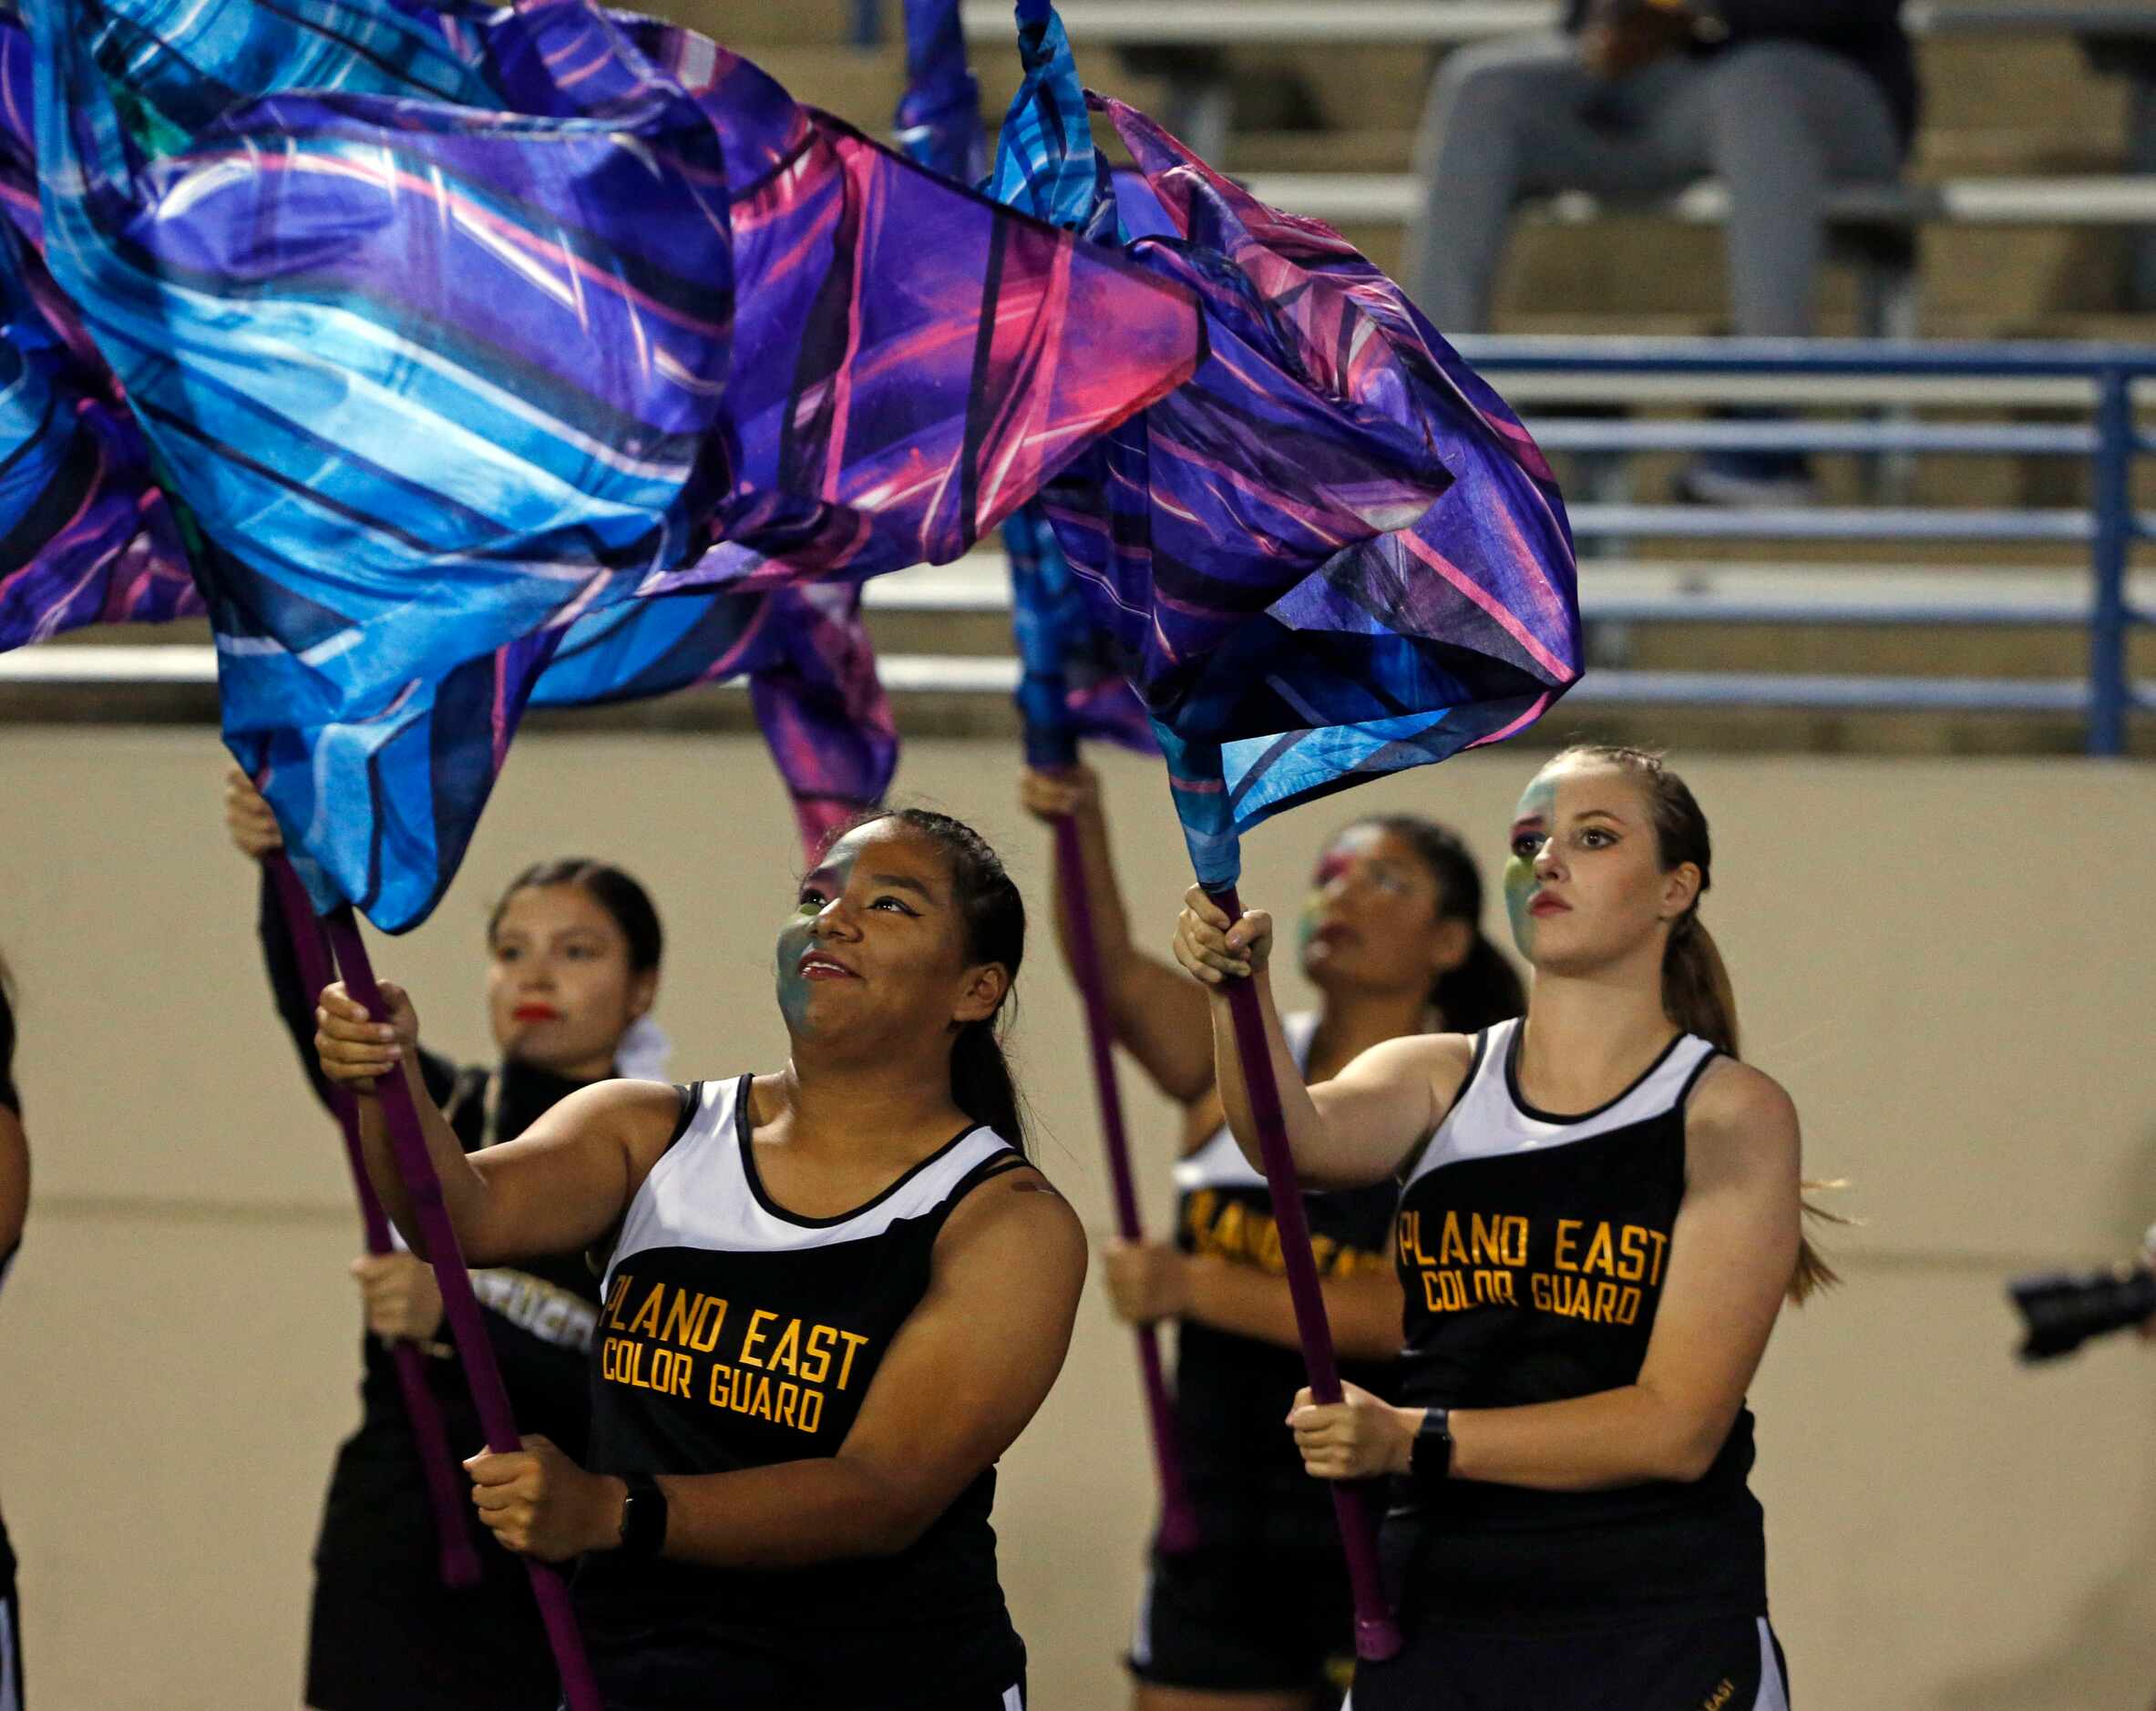 The Plano East high flag team performs on the sideline before the first half of a high...